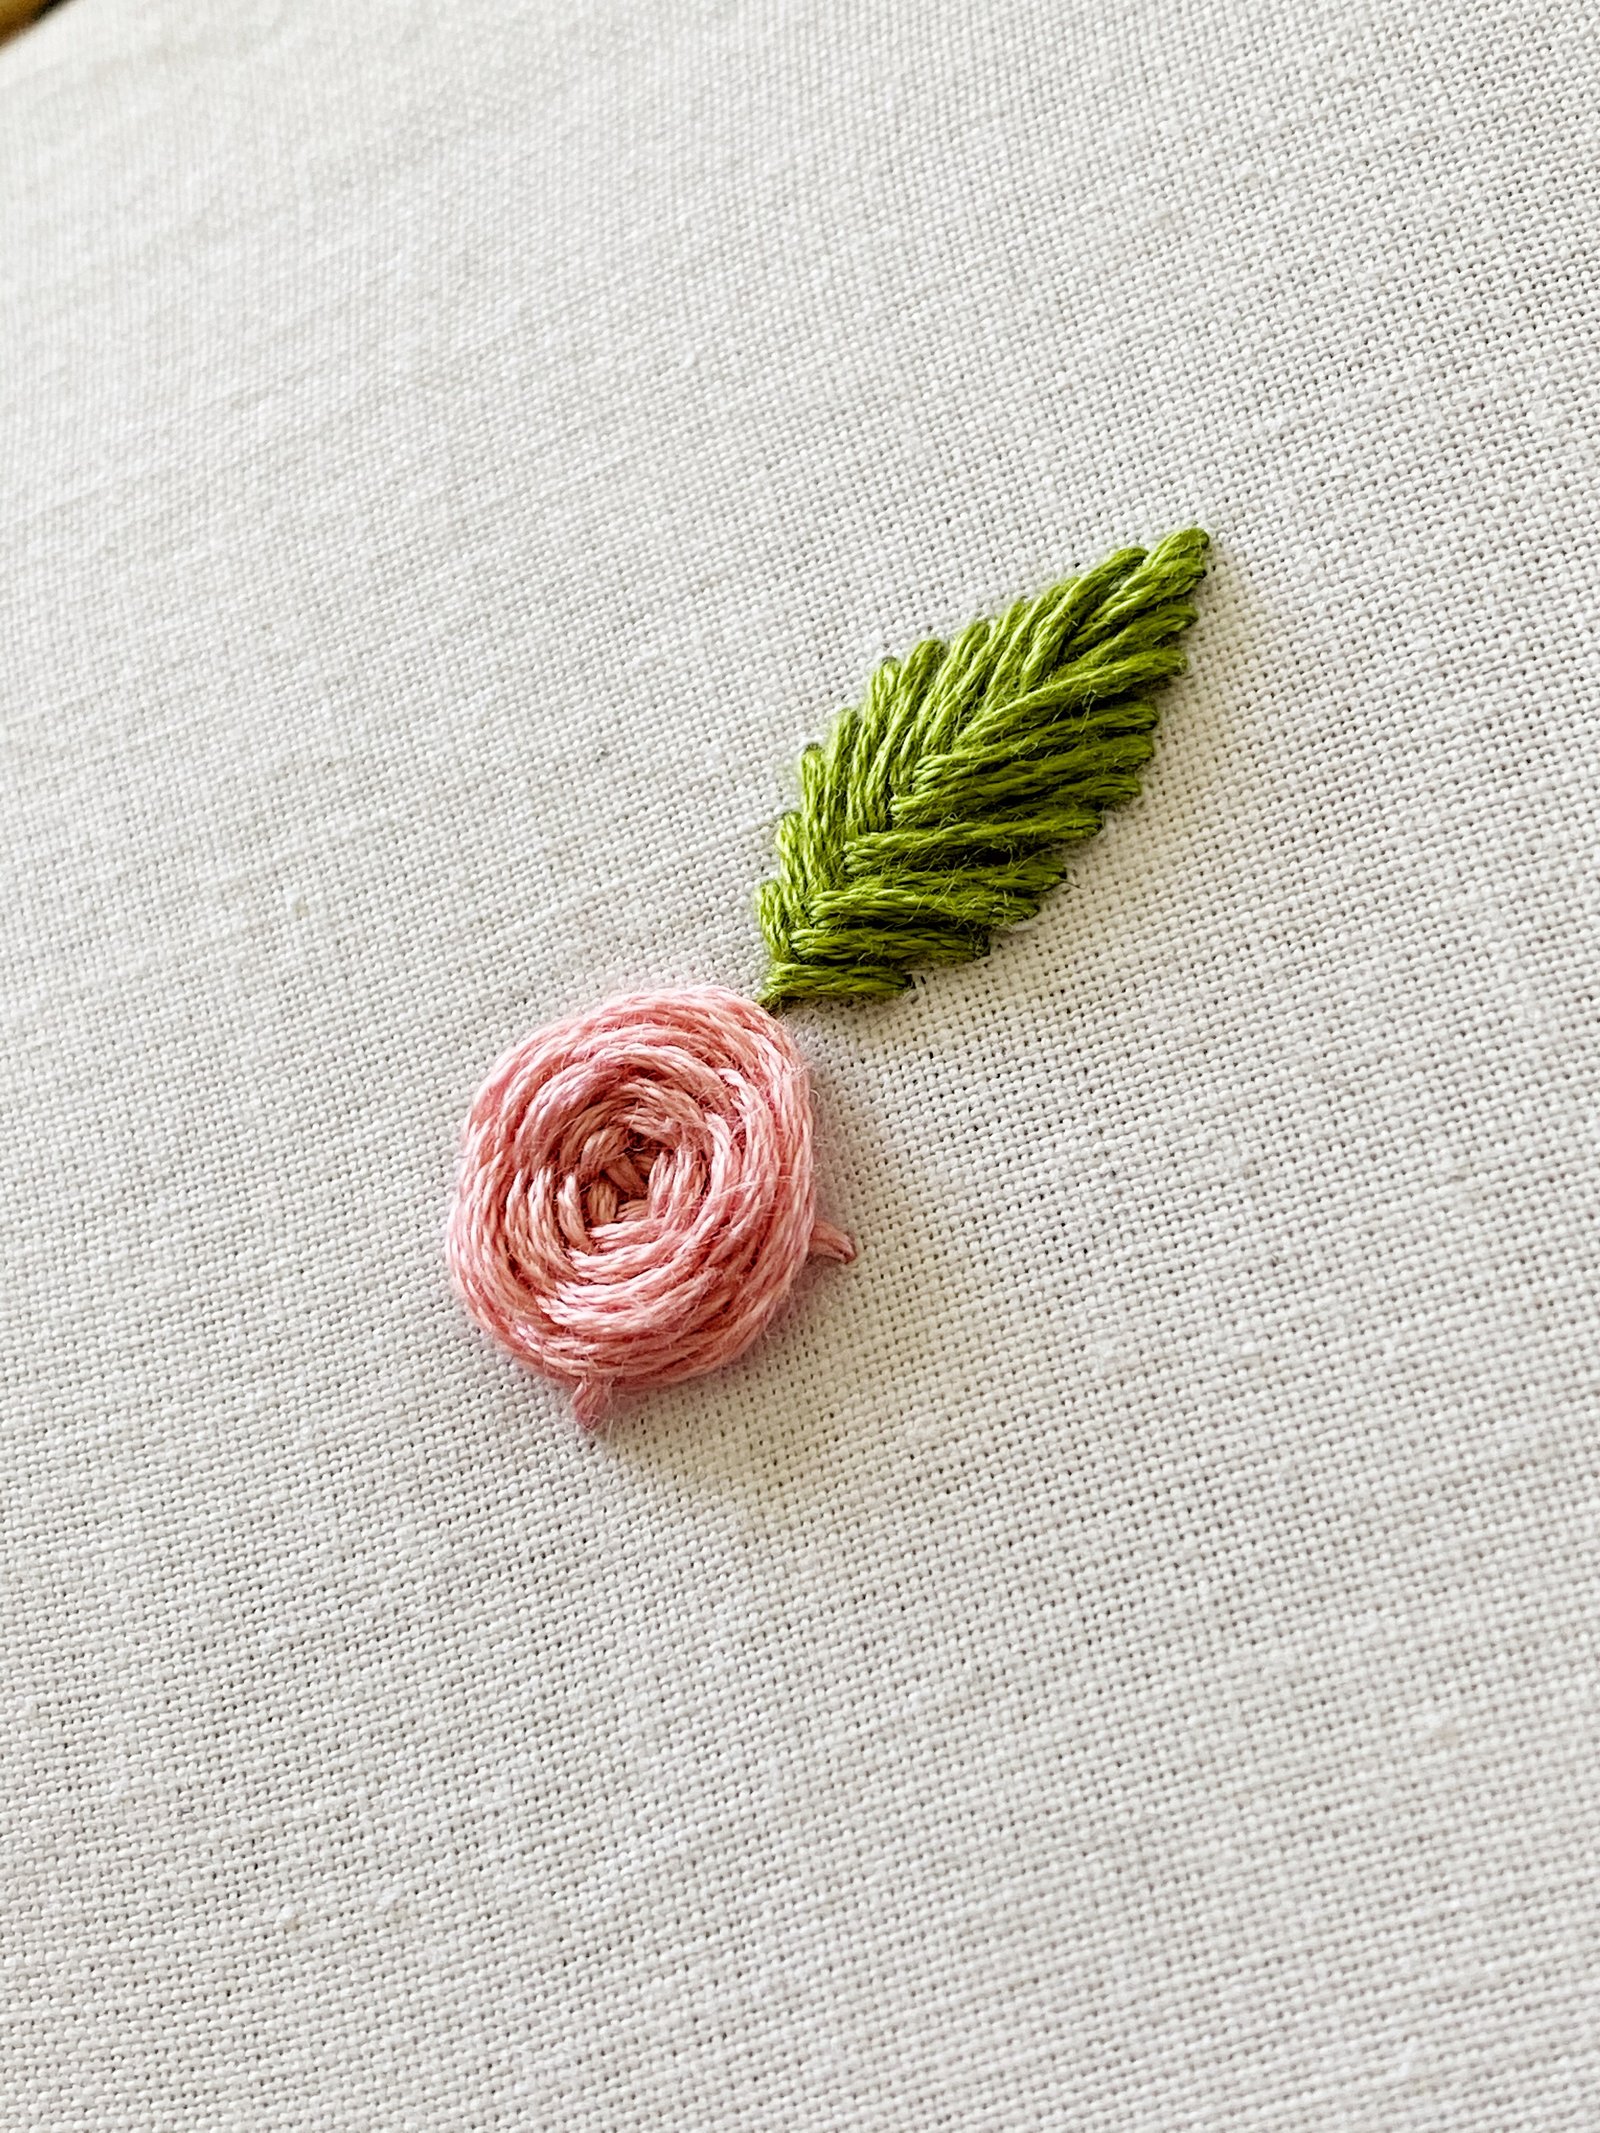 12 Roses for Hand Embroidery